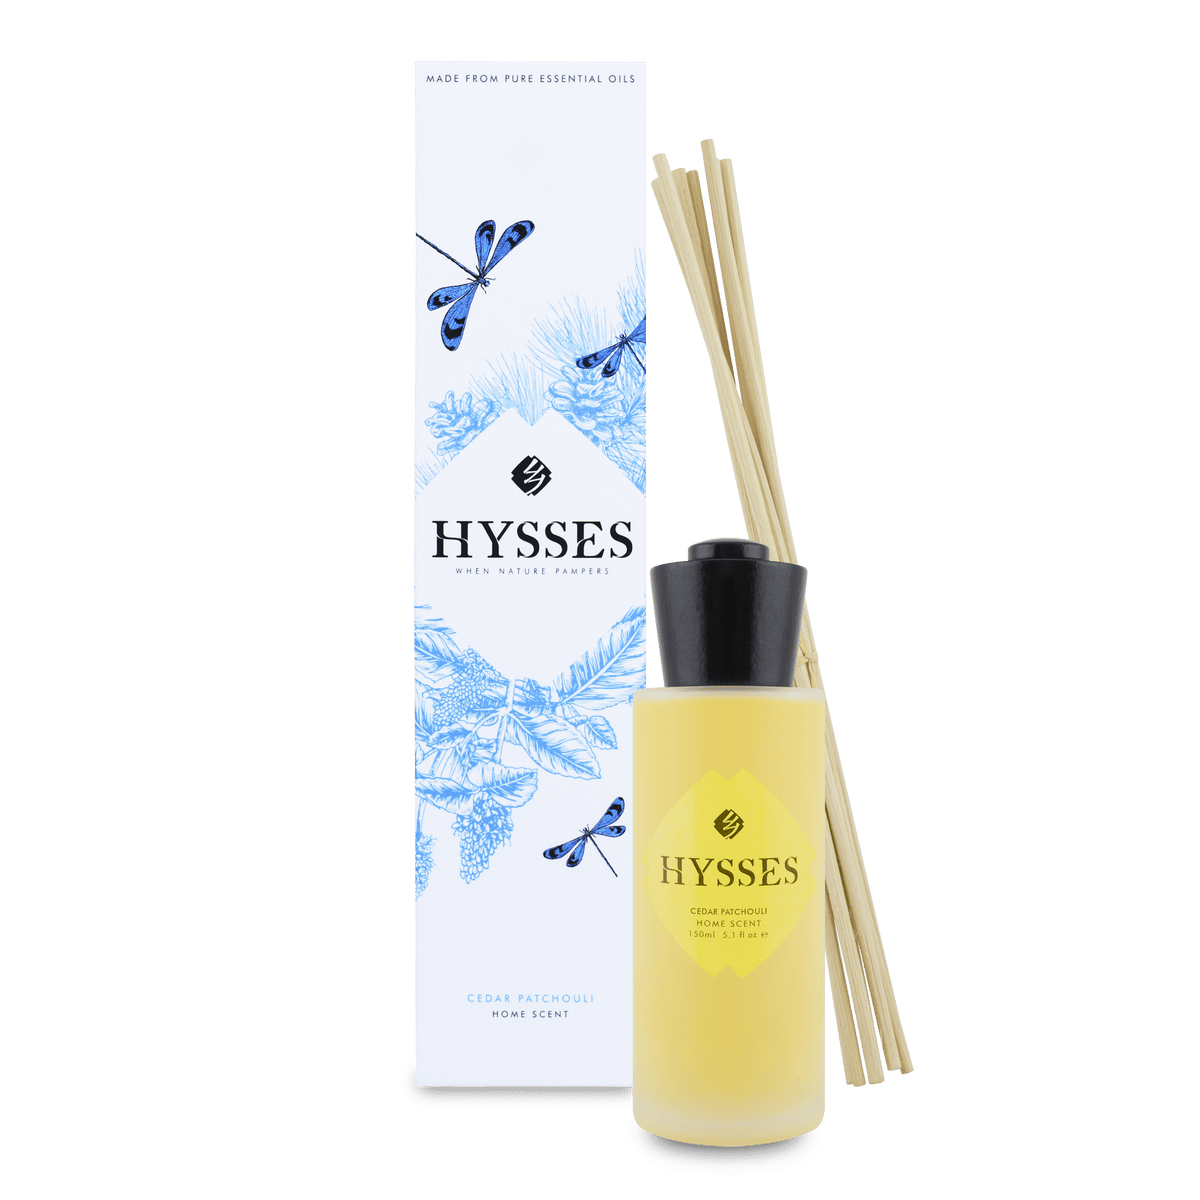 Hysses Home Scents 150ml Home Scent Reed Diffuser Cedar Patchouli